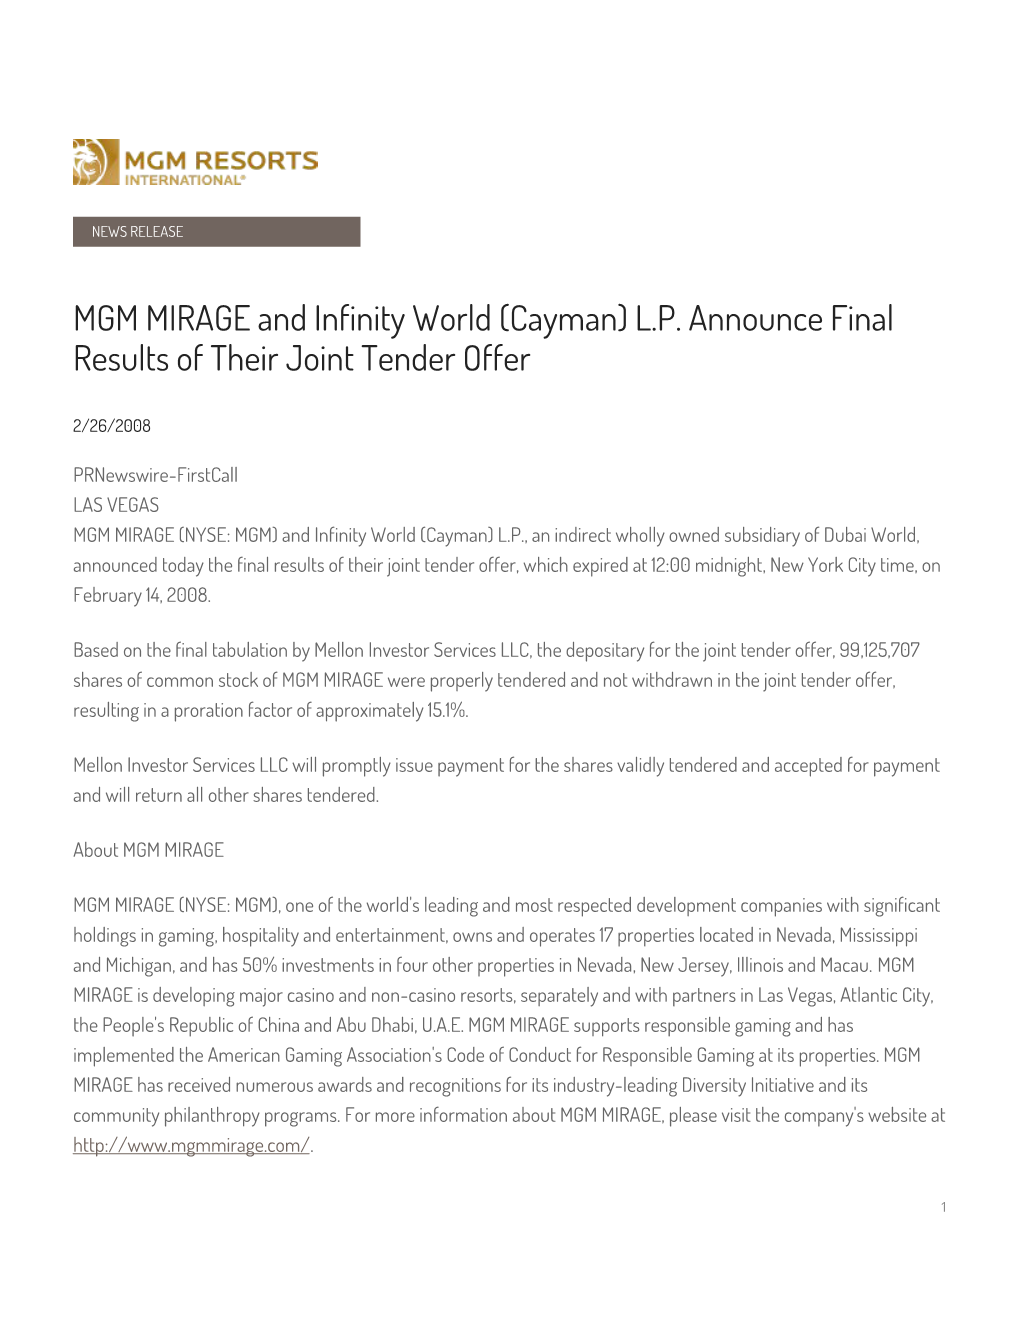 MGM MIRAGE and Infinity World (Cayman) L.P. Announce Final Results of Their Joint Tender Offer